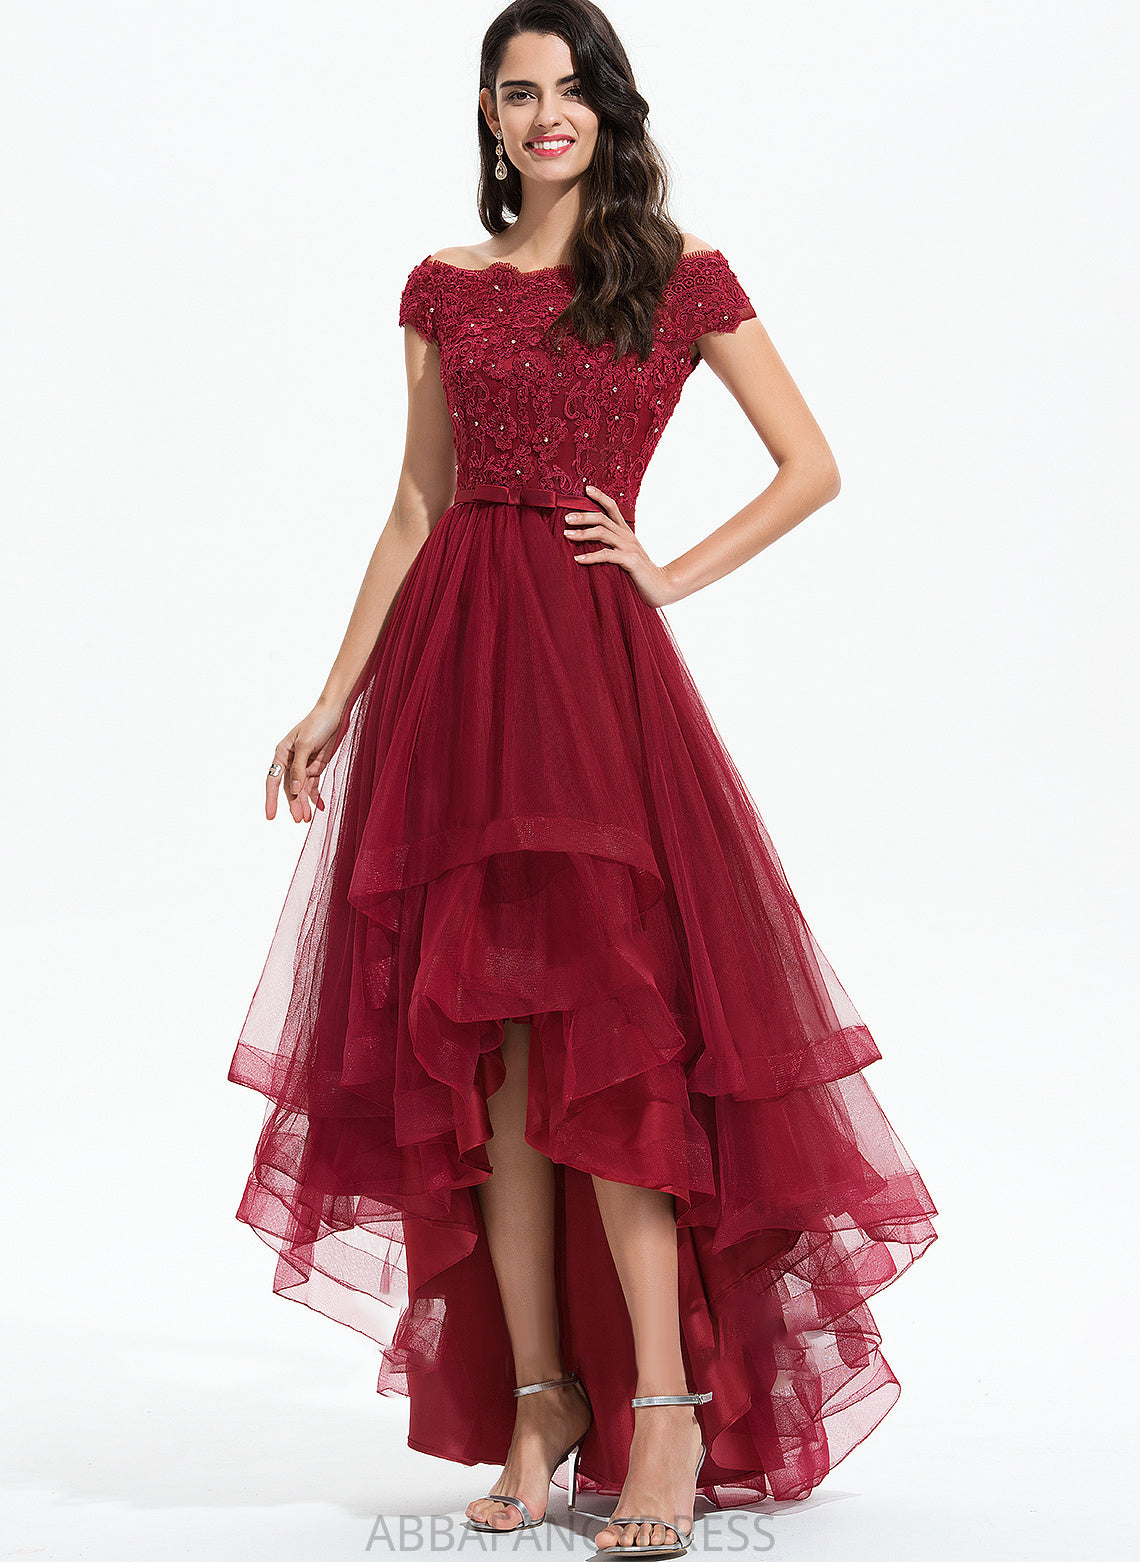 Asymmetrical Bow(s) Off-the-Shoulder Embellishment Lace Sequins Fabric Length Neckline Tulle Sleeve Beading